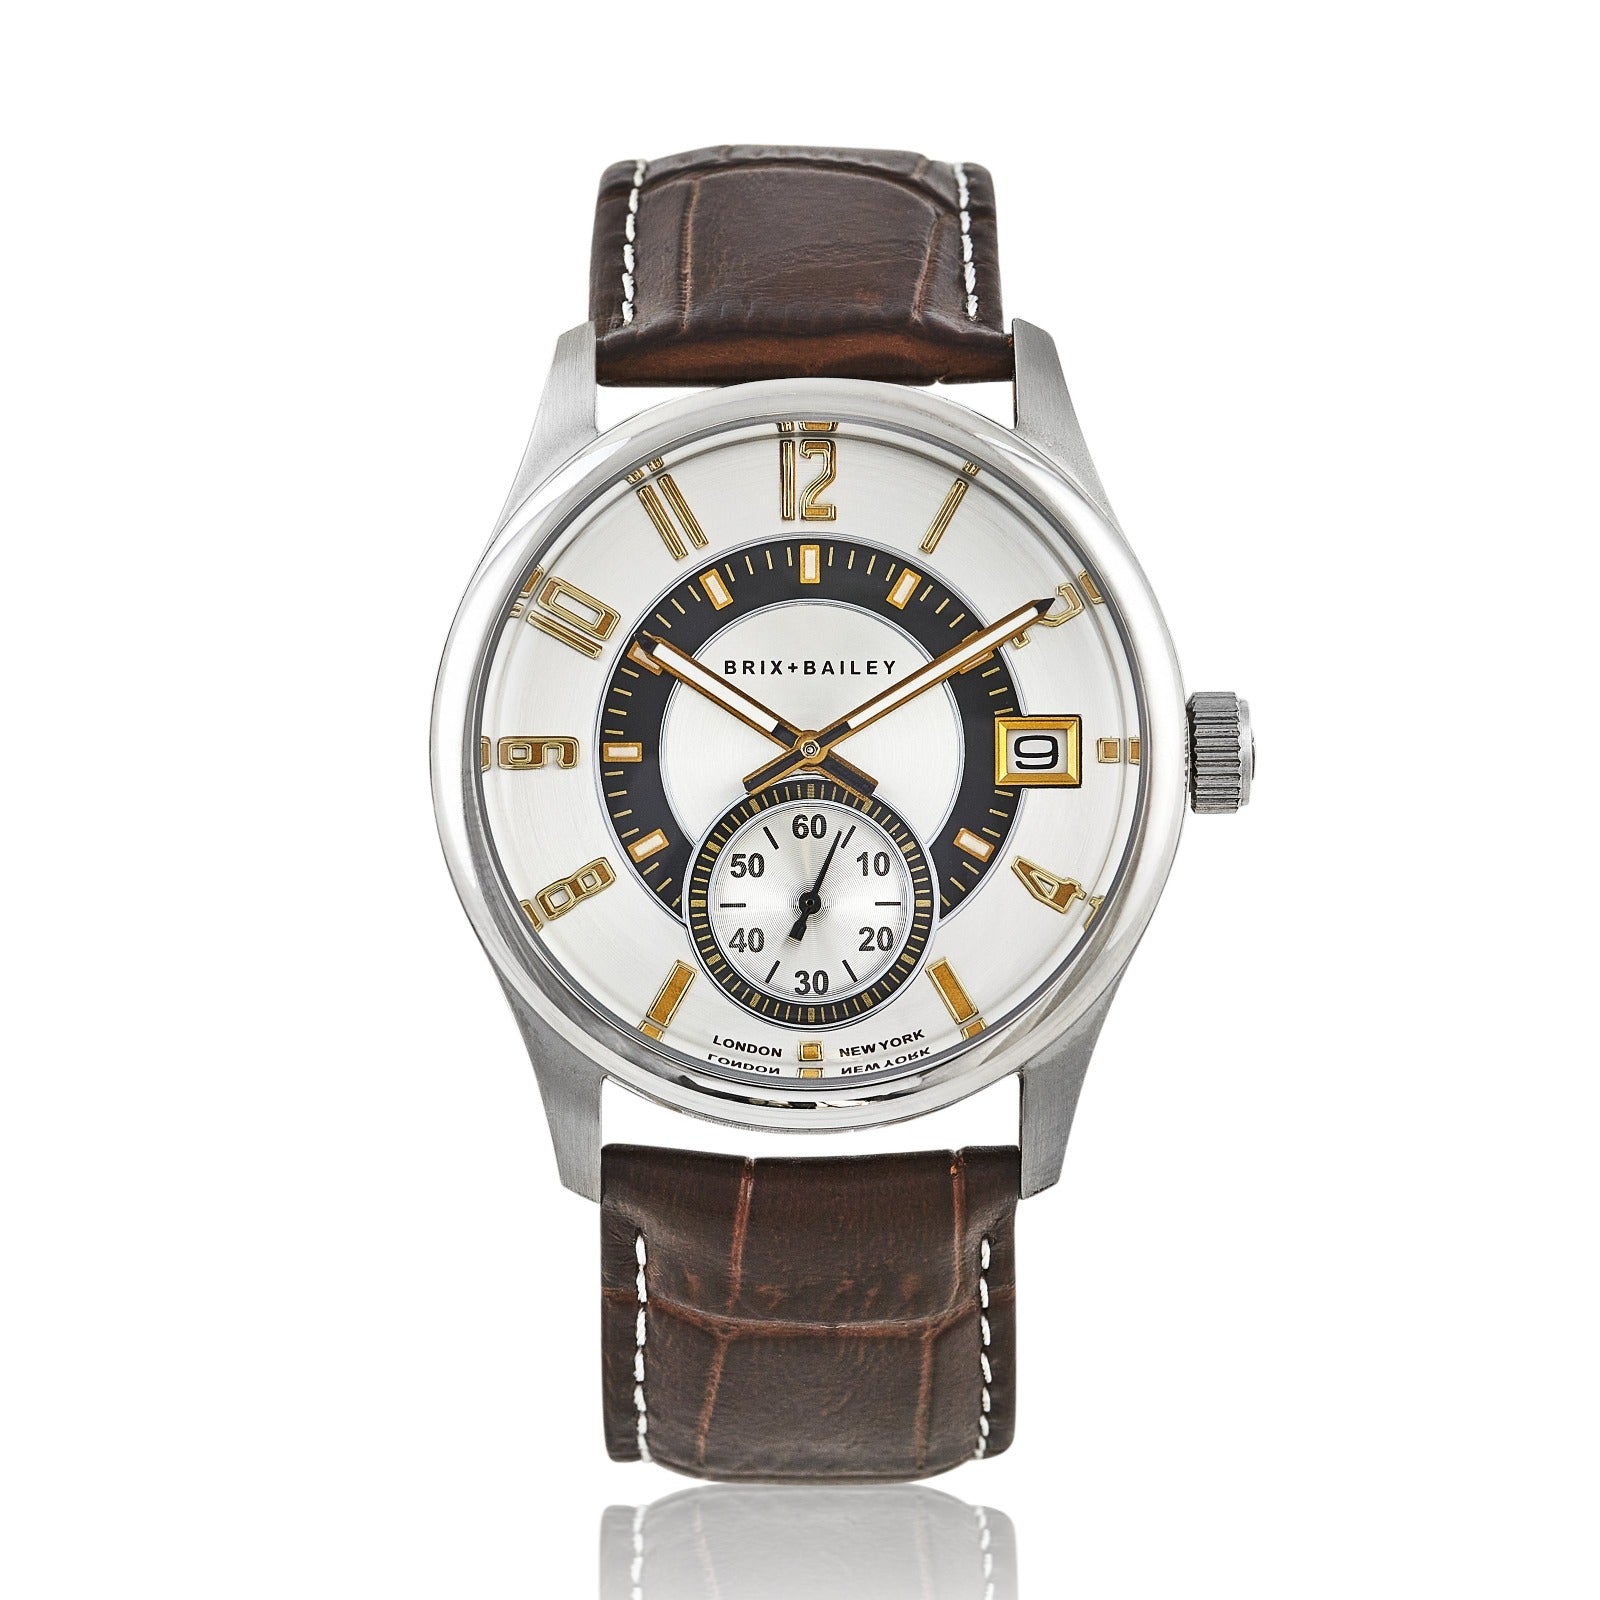 Gold / Brown / Silver The Brix + Bailey Men’s Gold And Silver Price Leather Strap Watch Form Five Bidld One Size Brix+Bailey